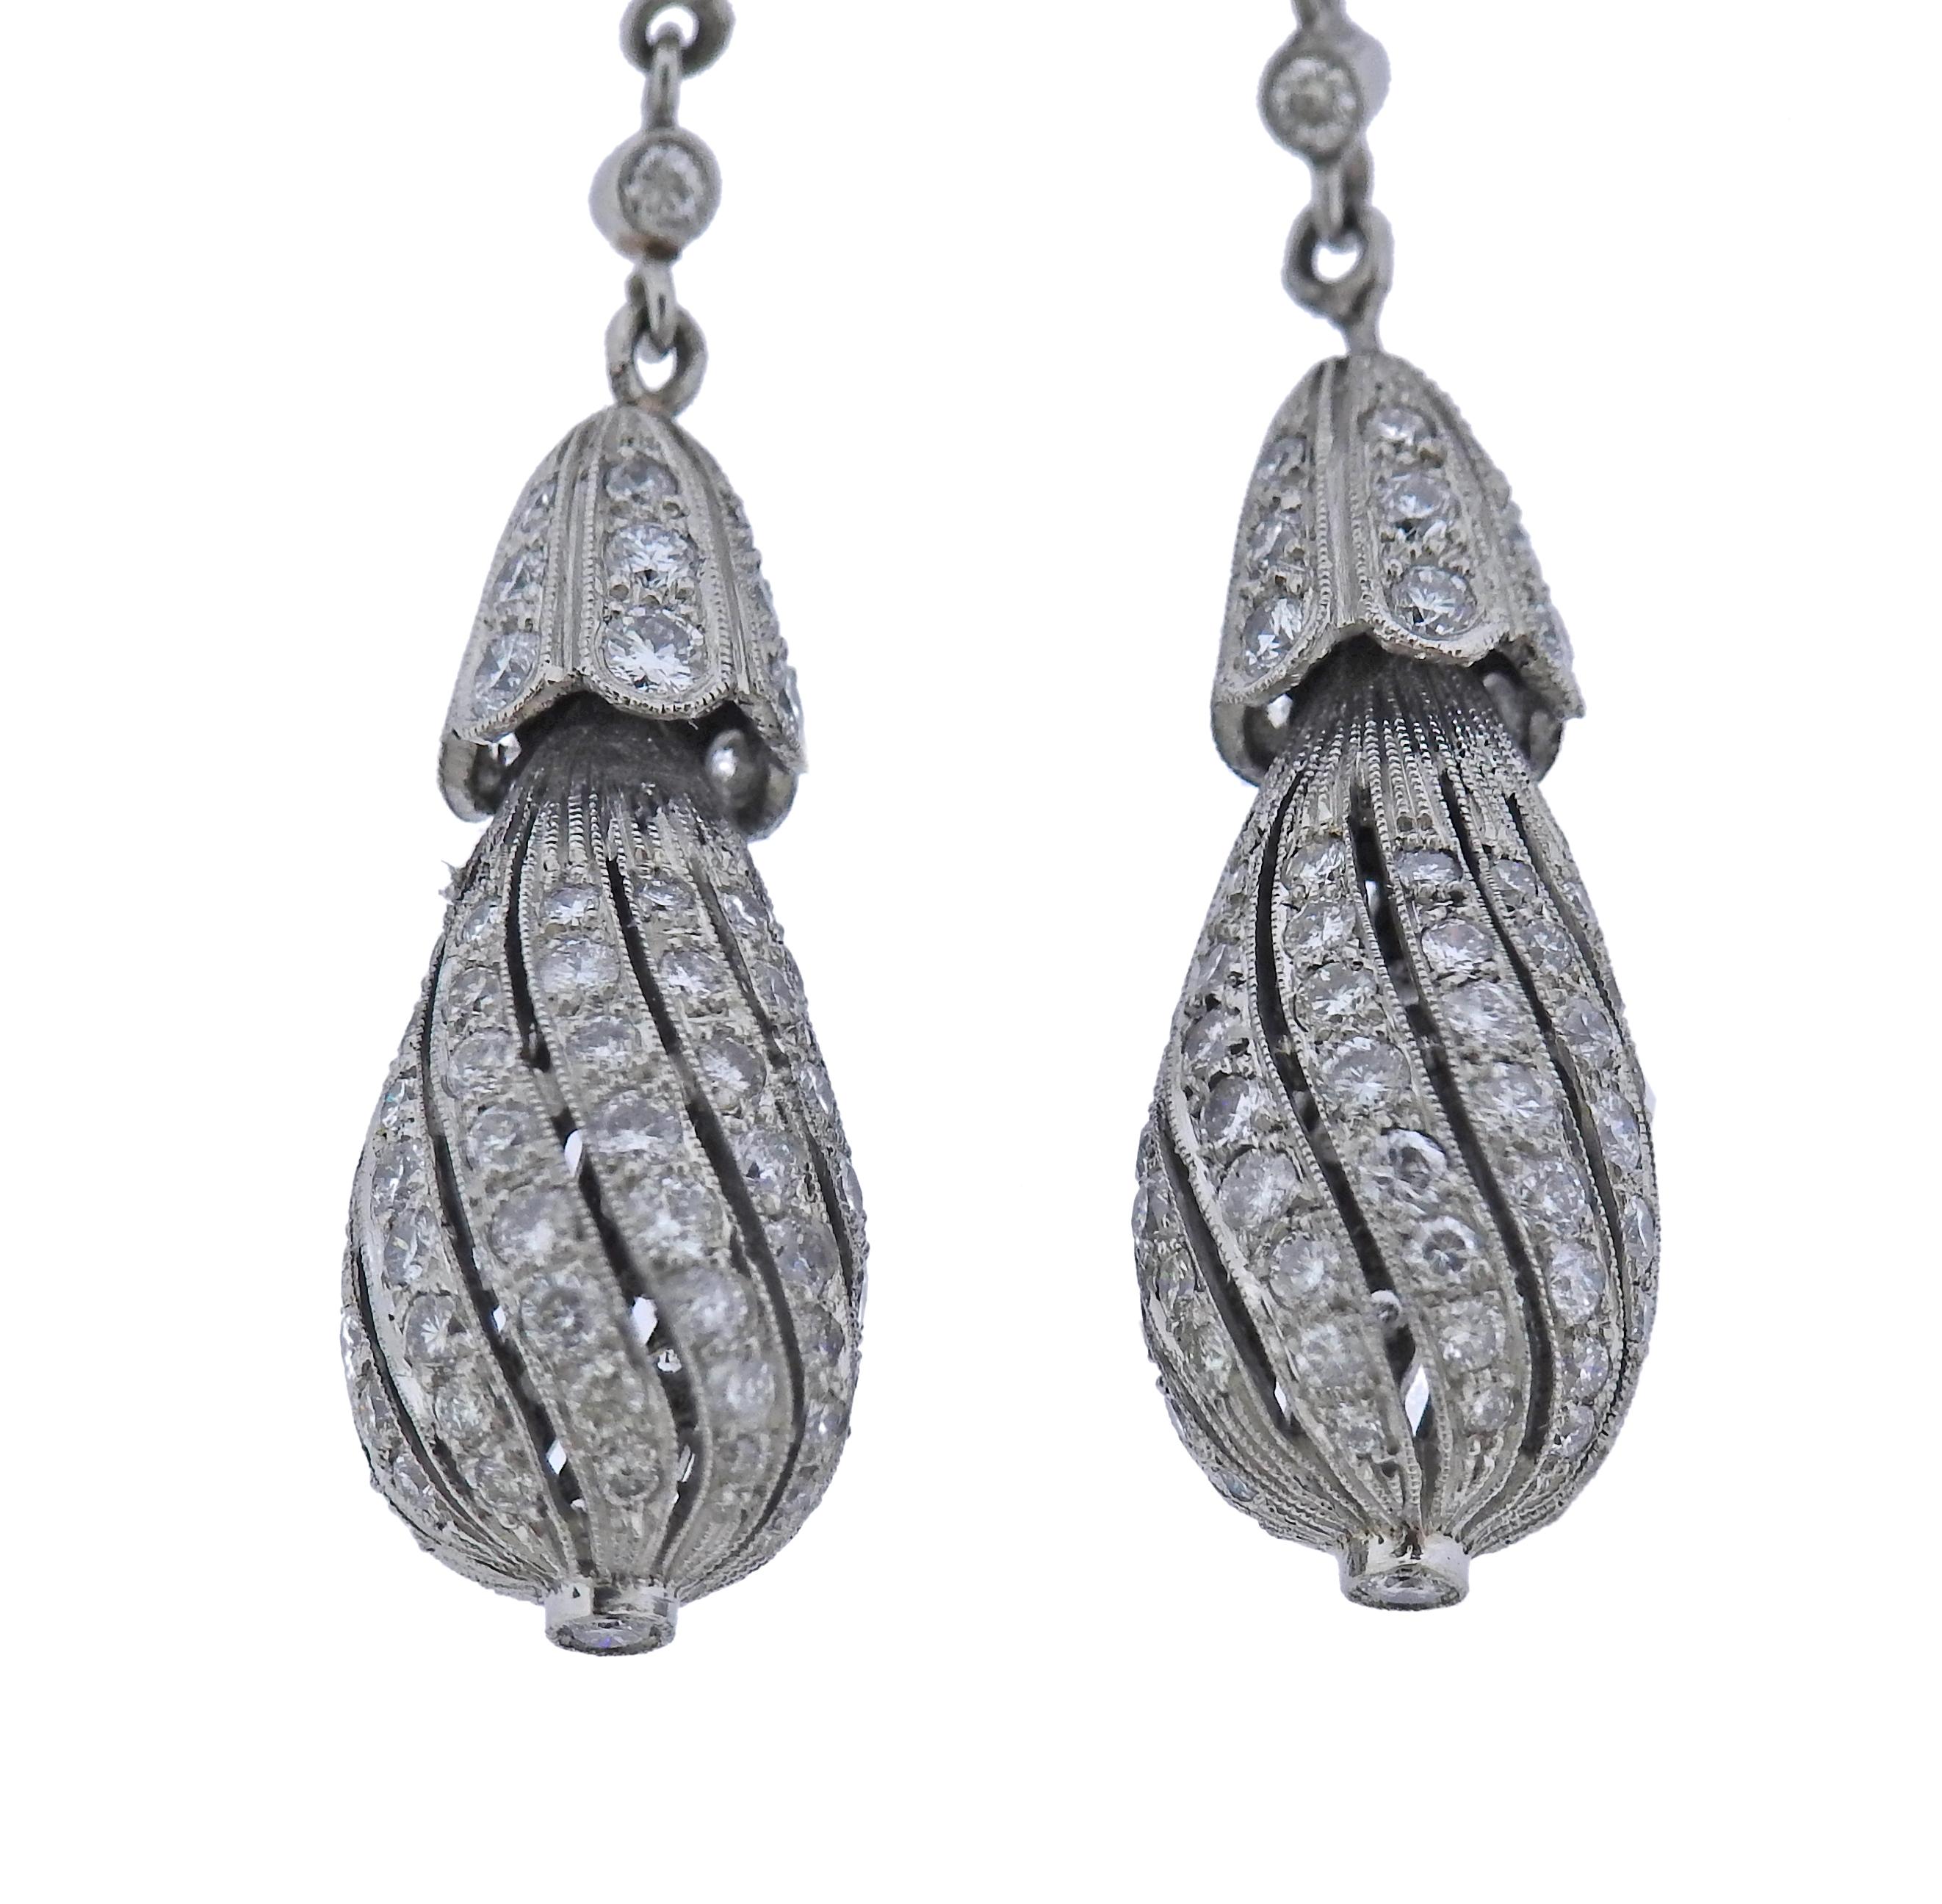 Pair of platinum drop earrings, with gold backs, approx. 1.80ctw in diamonds. Earrings measure 55mm long. Tested plat. gold backs. Weight - 10.6 grams.